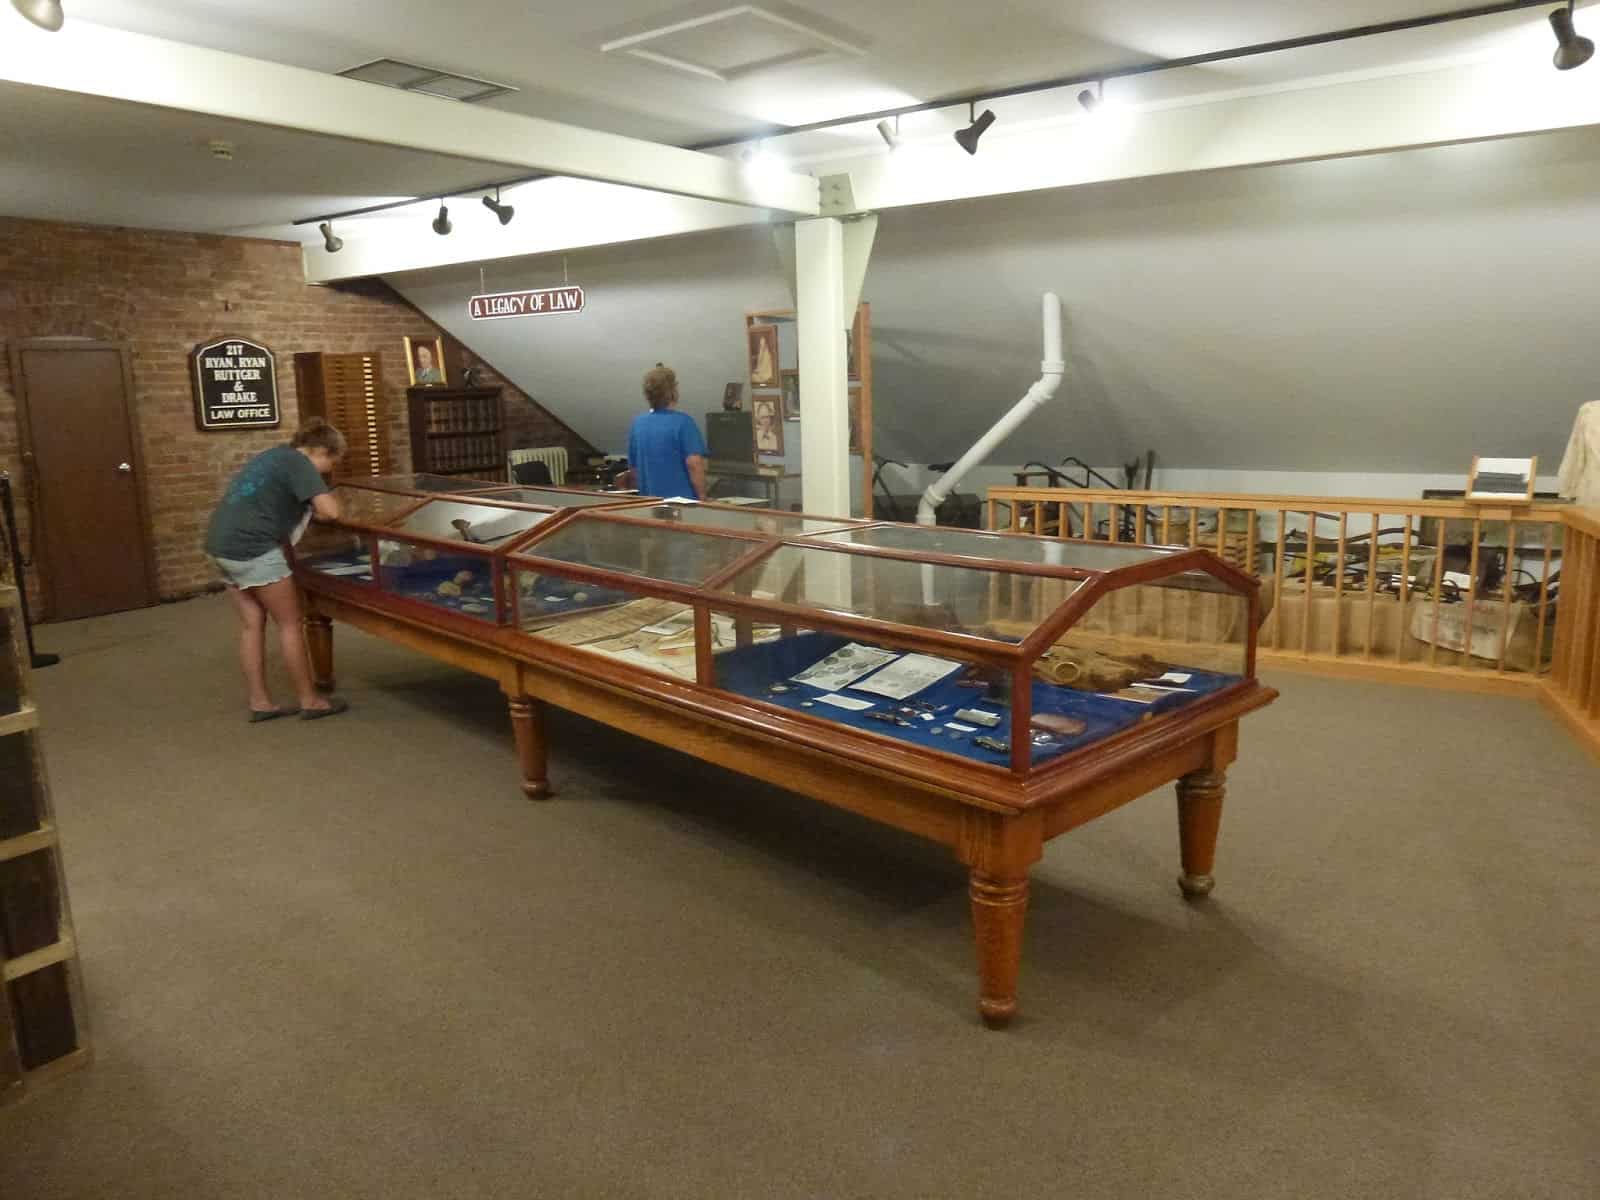 Crow Wing County Historical Society Museum in Brainerd, Minnesota